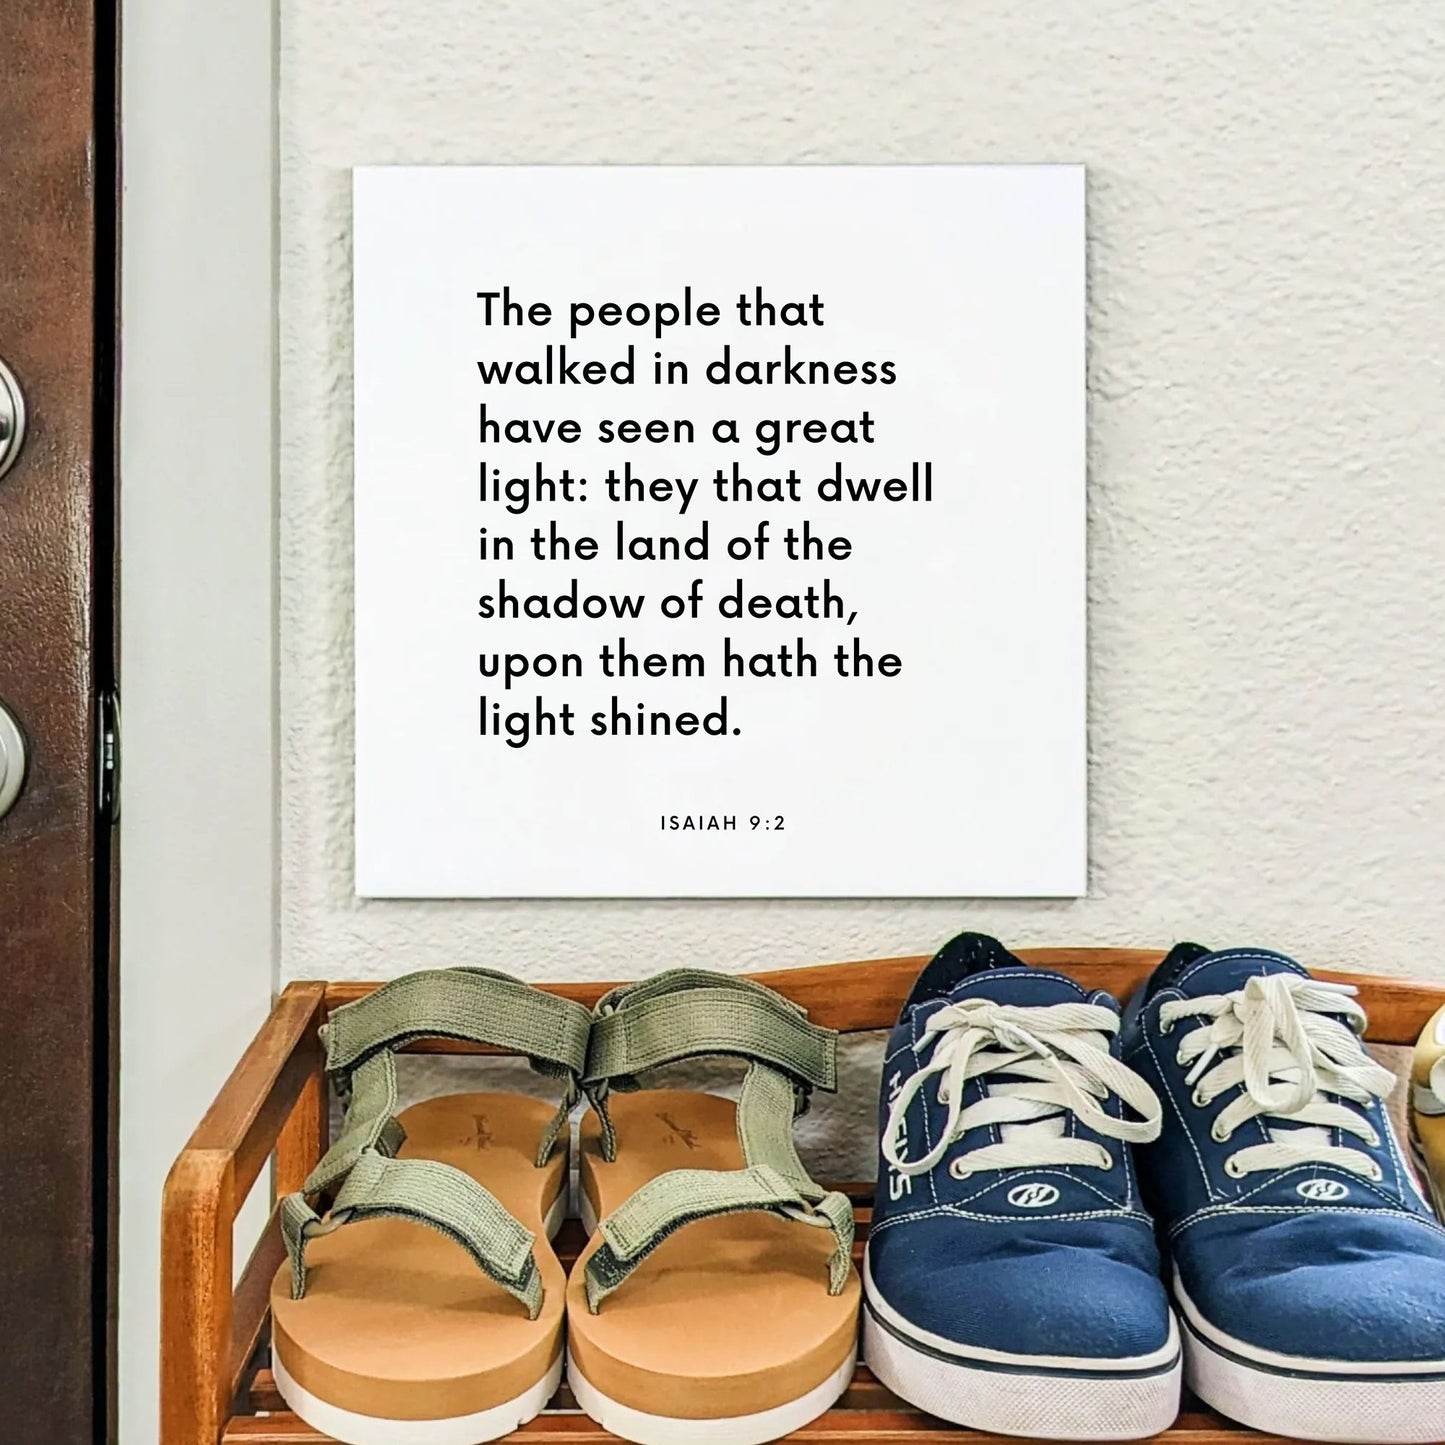 Shoes mouting of the scripture tile for Isaiah 9:2 - "The people that walked in darkness have seen a great light"